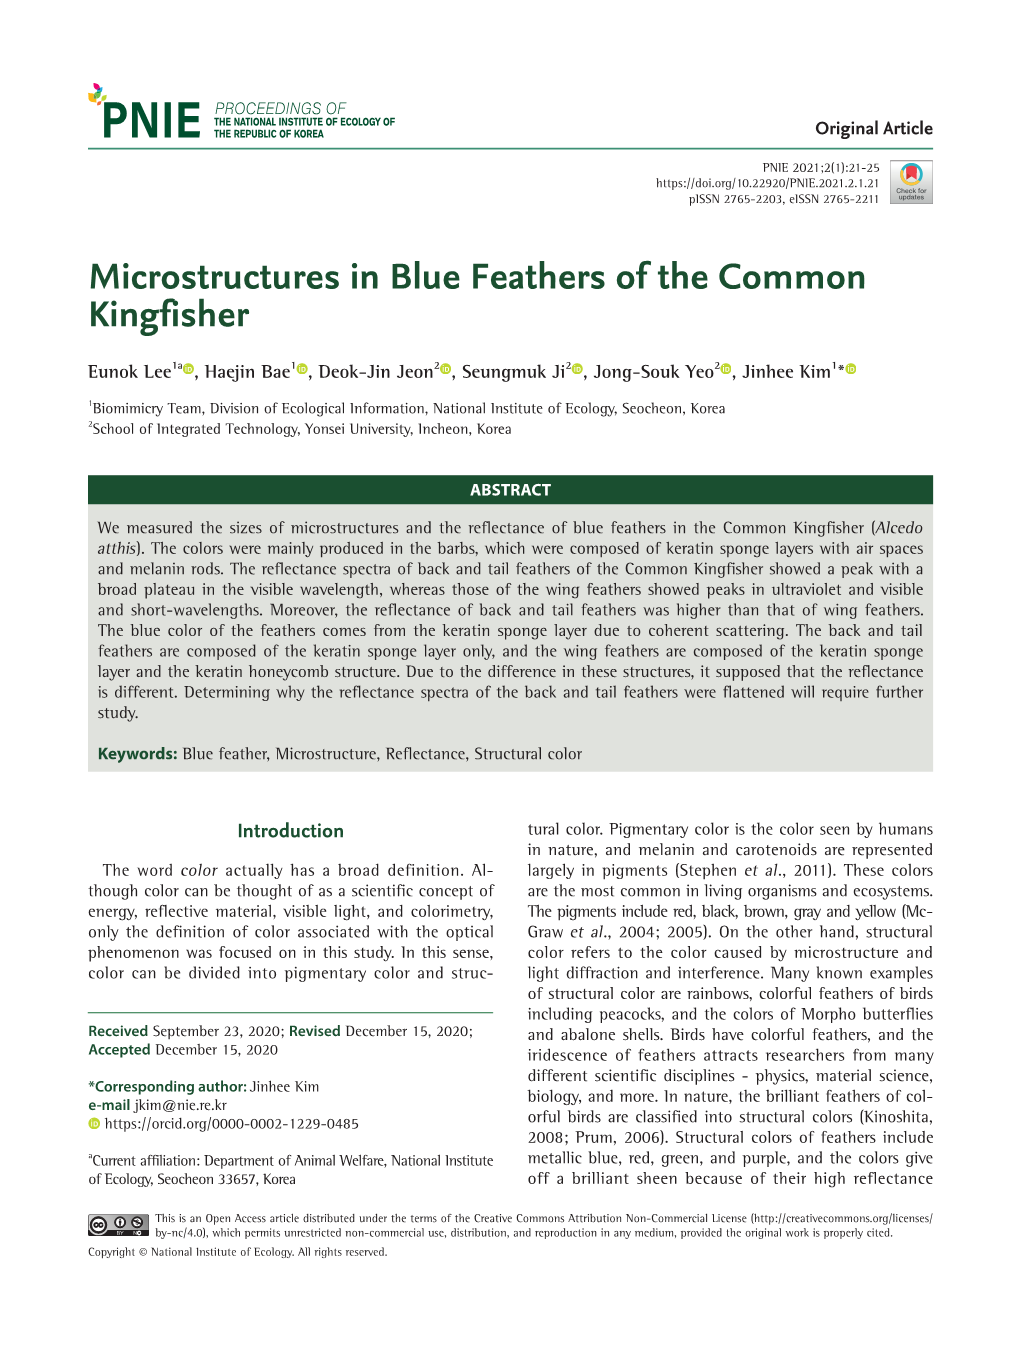 Microstructures in Blue Feathers of the Common Kingfisher